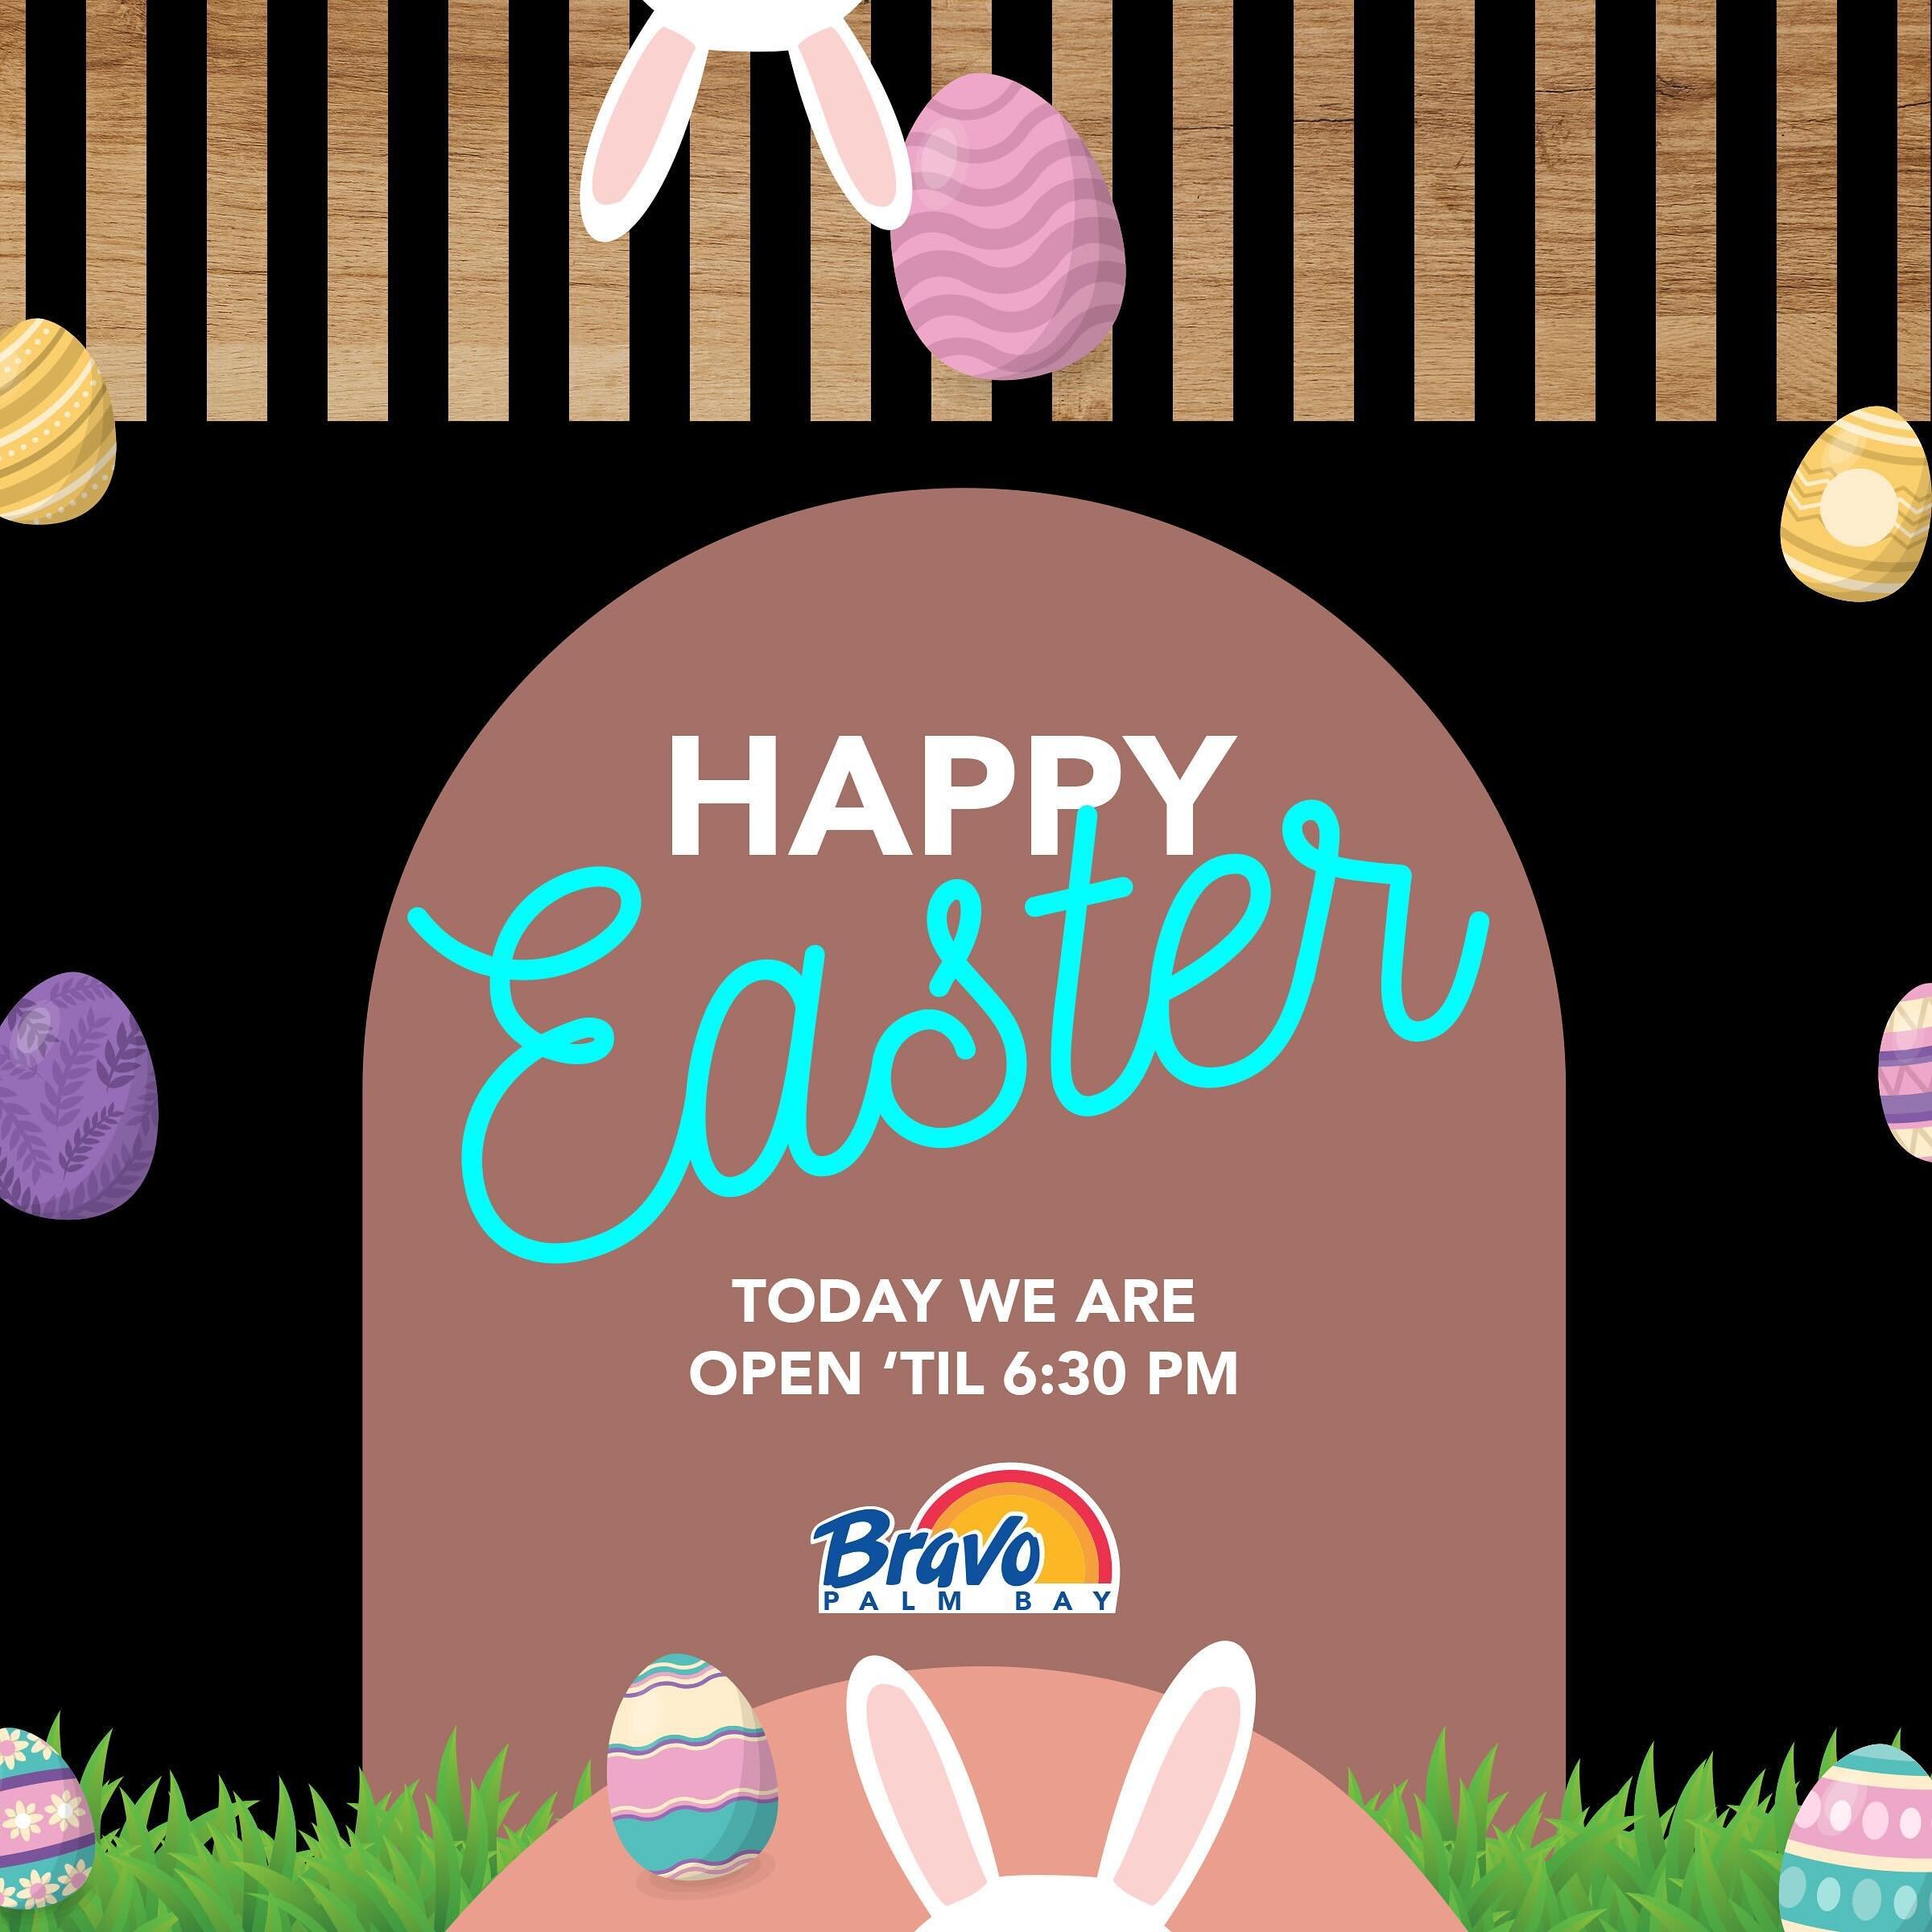 HAPPY EASTER!

We hope you have an EGG-celent day with your loved ones, for any last minute items you&rsquo;re missing for today&rsquo;s occasion we are open &rsquo;til 6:30 PM.

🛒🐣🛒🪺🛒🐰

FELIZ DIA DE PASCUA!

Esperamos que tengan un d&iacute;a 